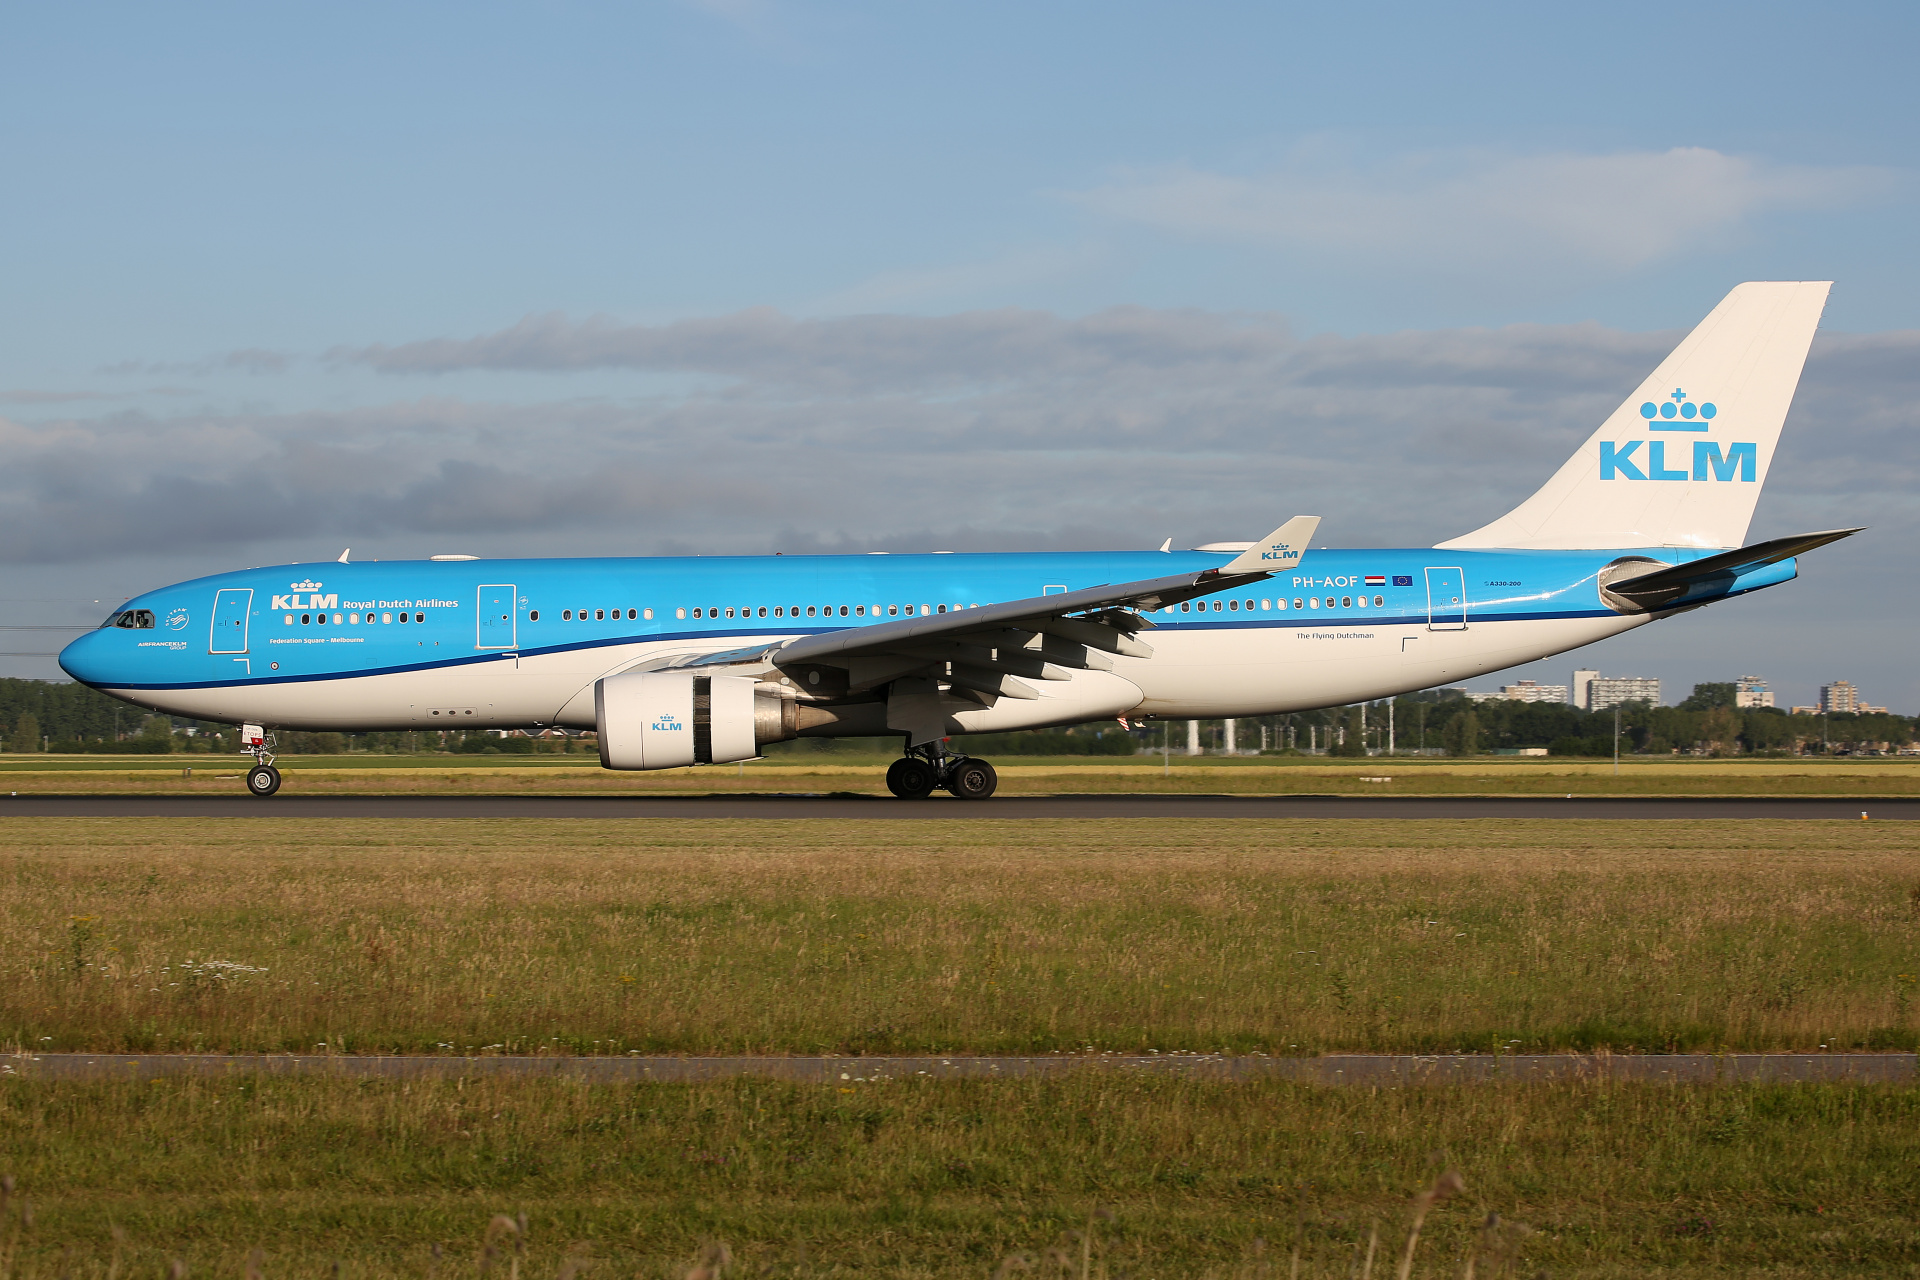 PH-AOF (new livery) (Aircraft » Schiphol Spotting » Airbus A330-200 » KLM Royal Dutch Airlines)